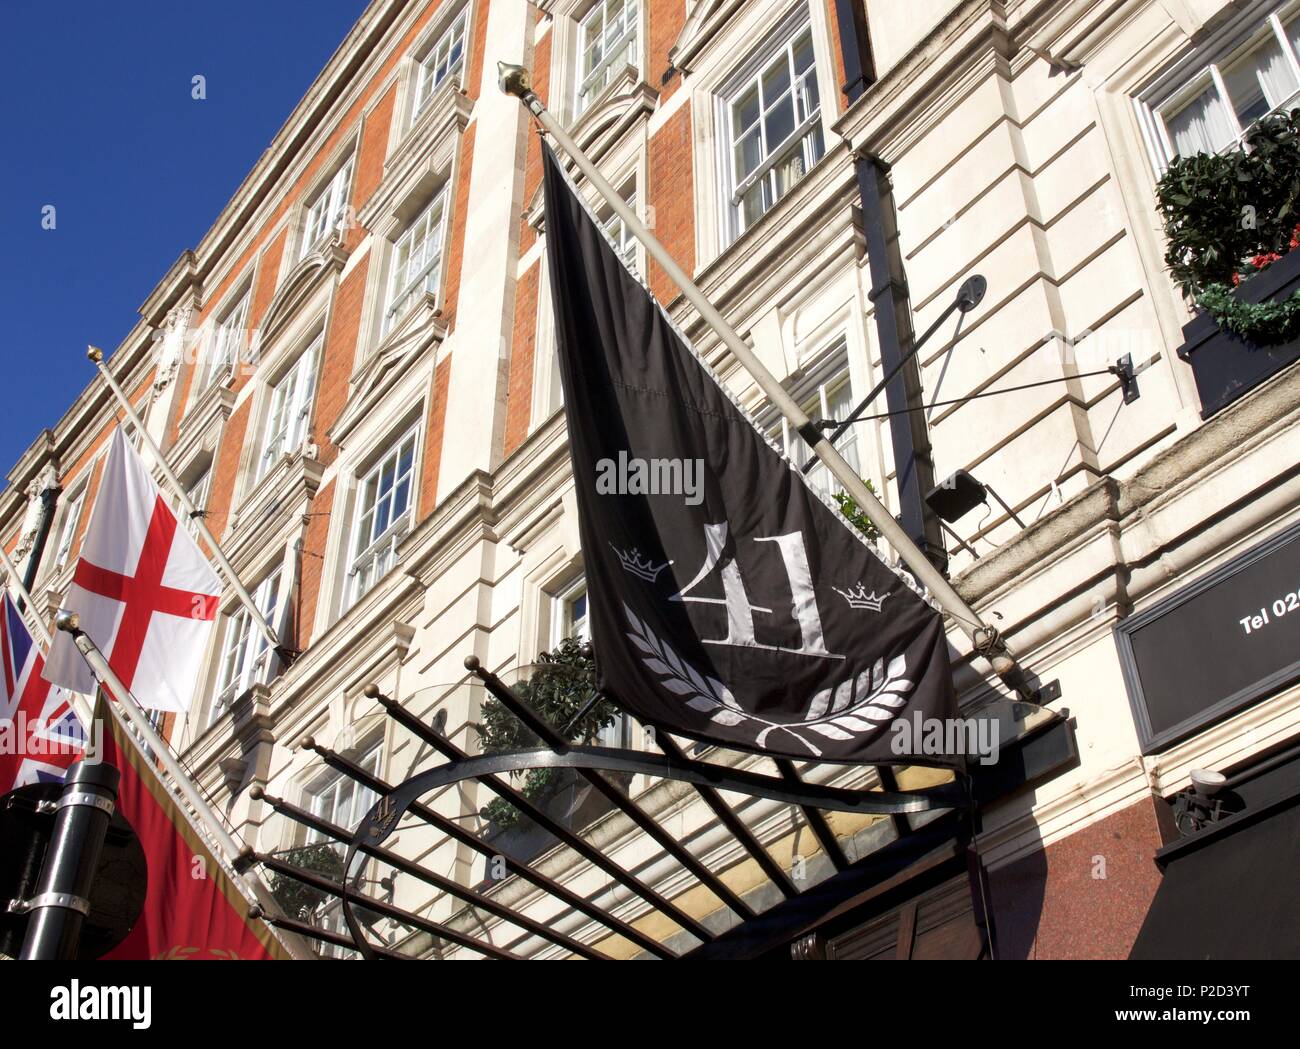 The hotel flag for 5 star, luxury boutique Hotel 41 on Buckingham Palace Road,Victoria,London which is part of the Red Carnation Hotel Collection Stock Photo